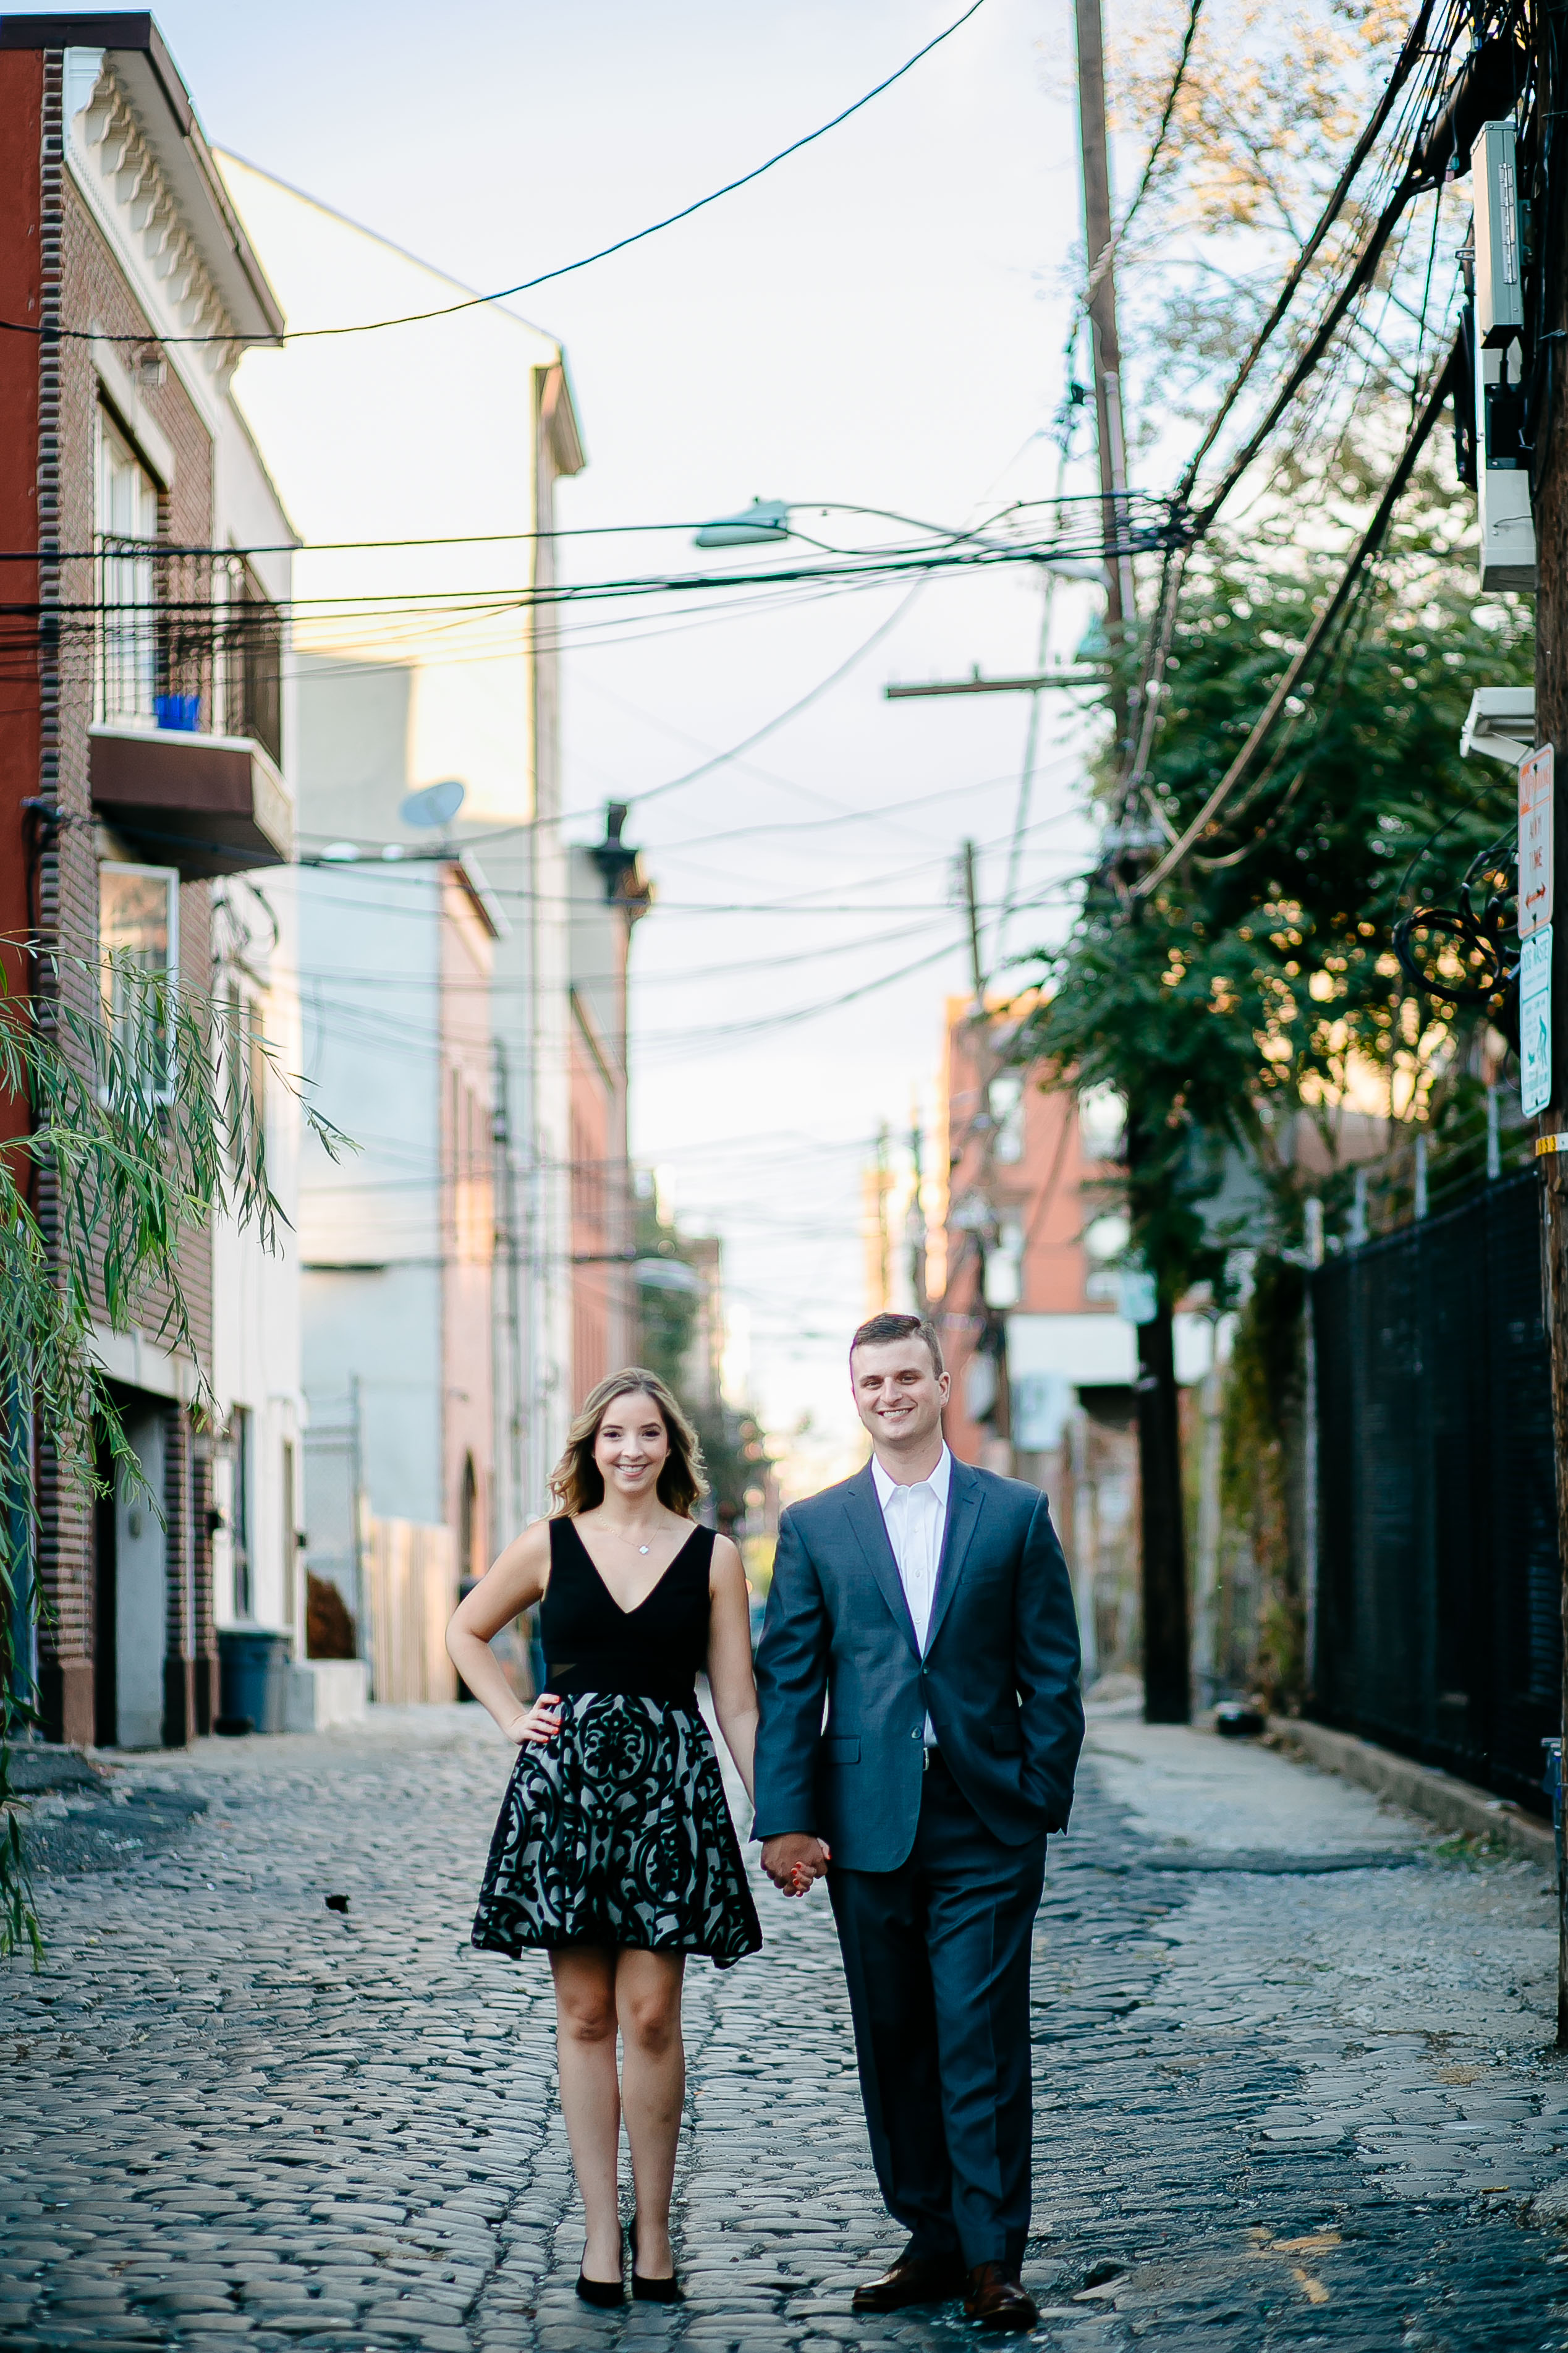 Our Hoboken bride and groom had an amazing engagement photo session and you can read our blog for trips and tricks for yours!